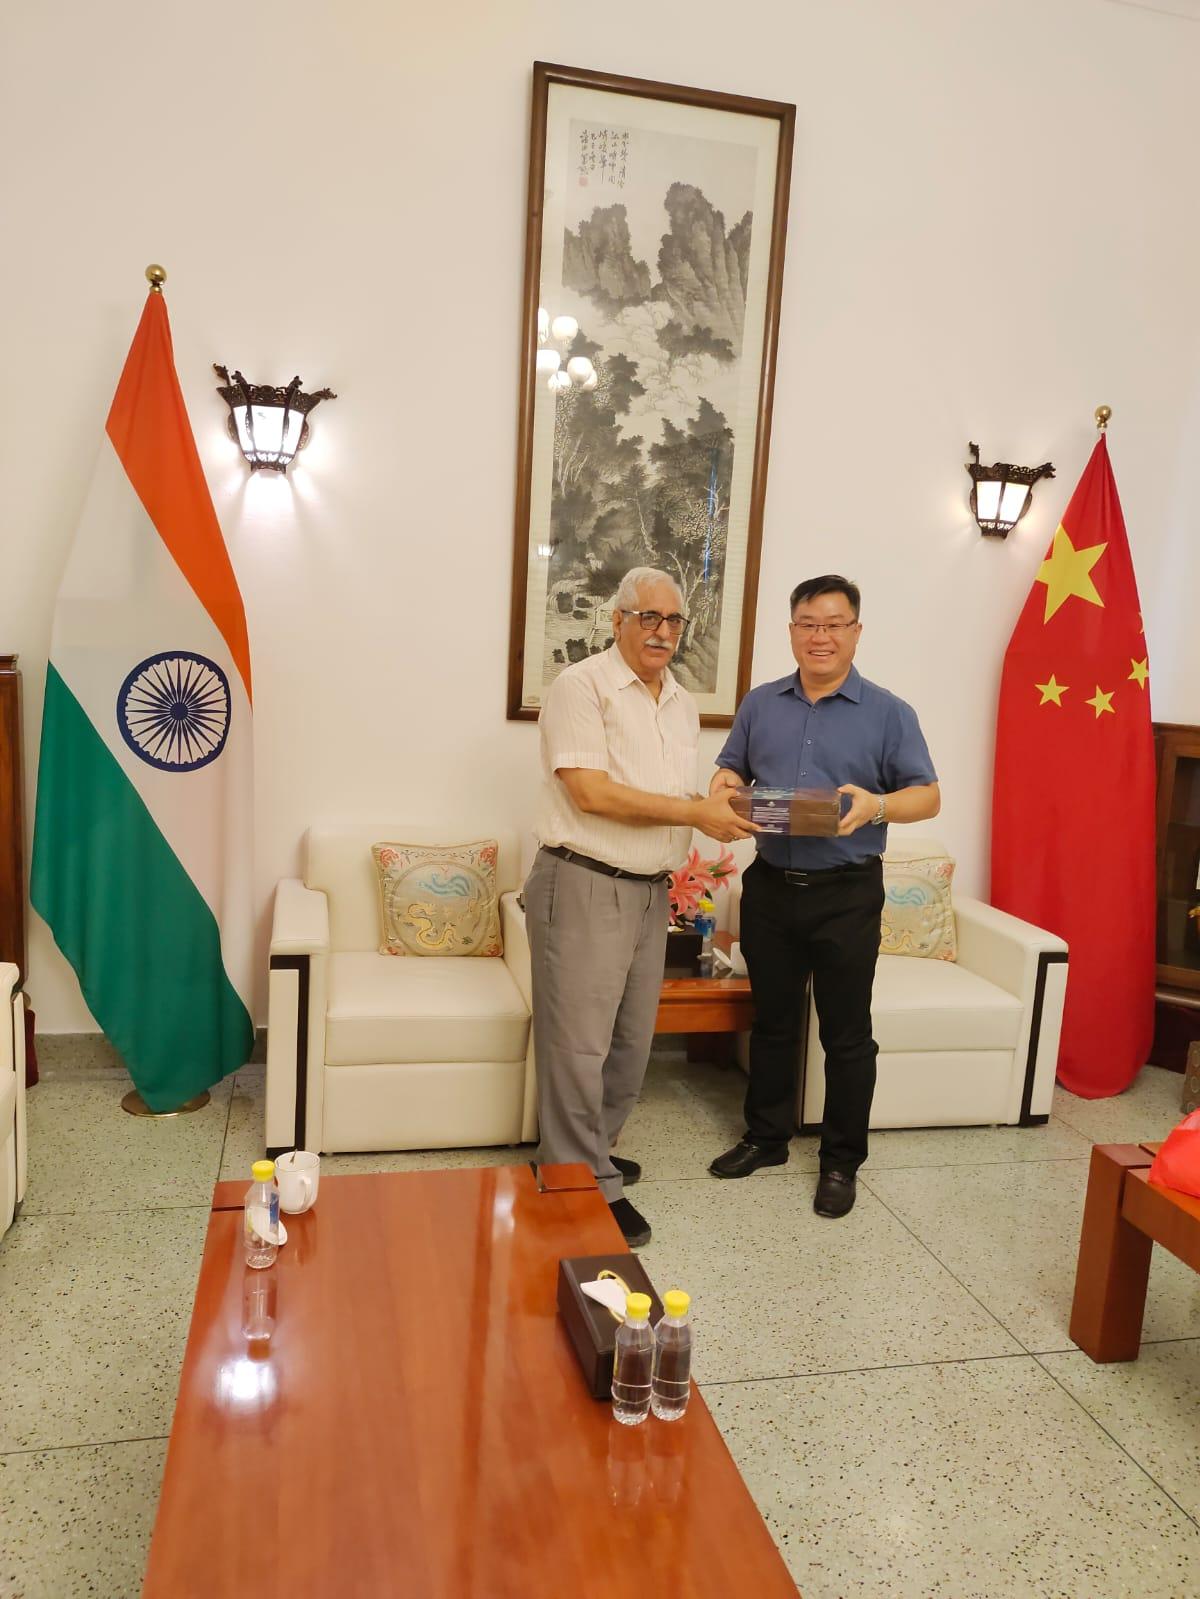 Dr. Inderjit Singh met with Chinese Minister Wang Ximing